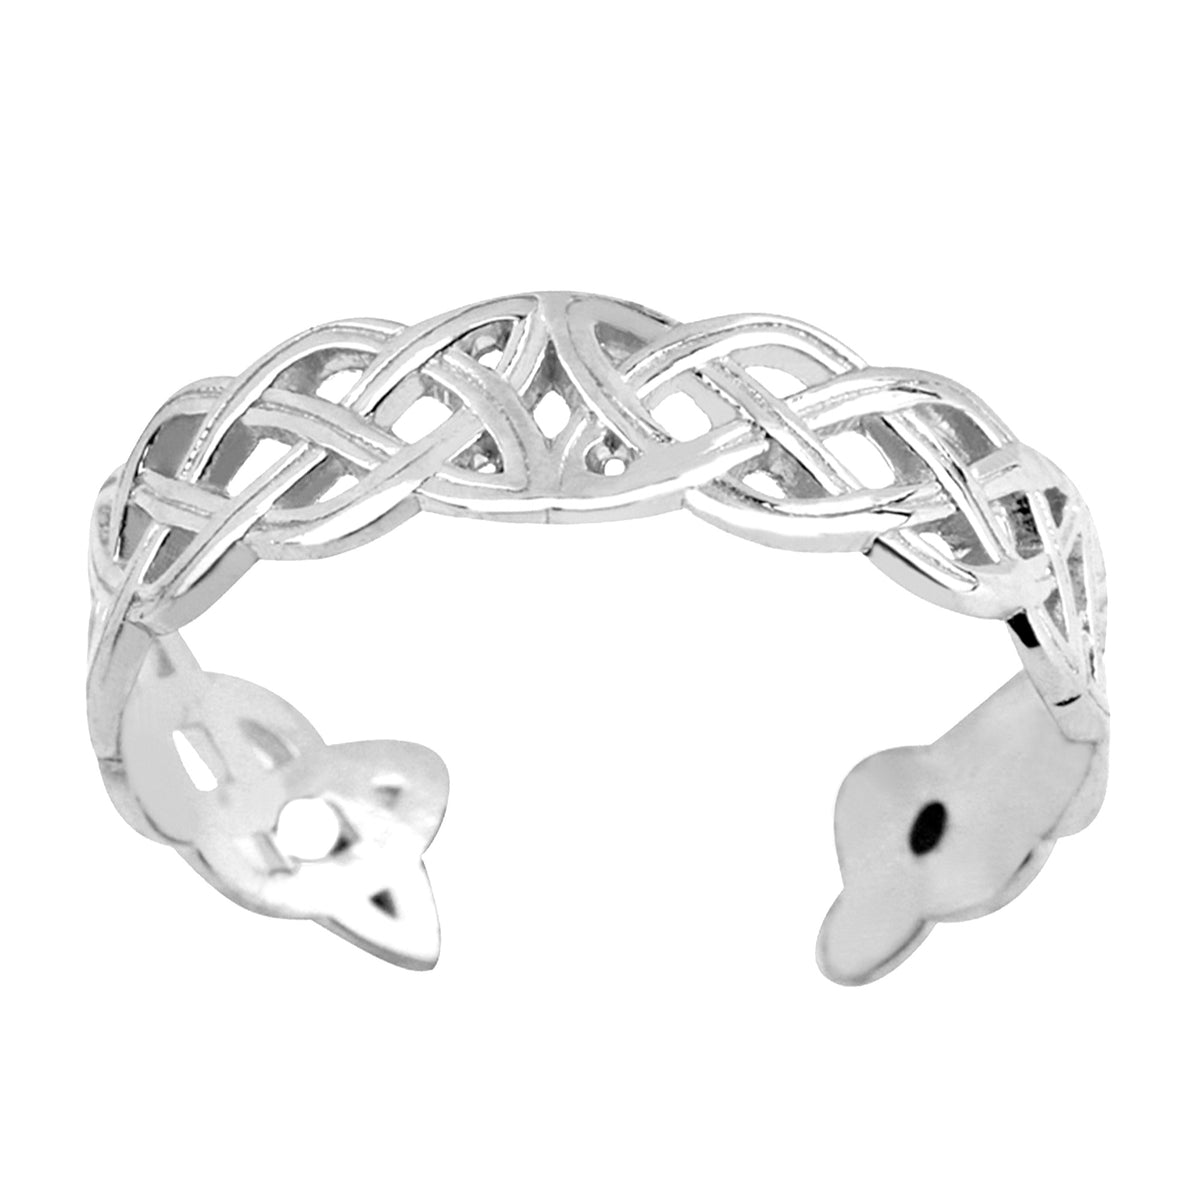 14K White Gold Celtic Knot Weave Design Cuff Style Adjustable Toe Ring